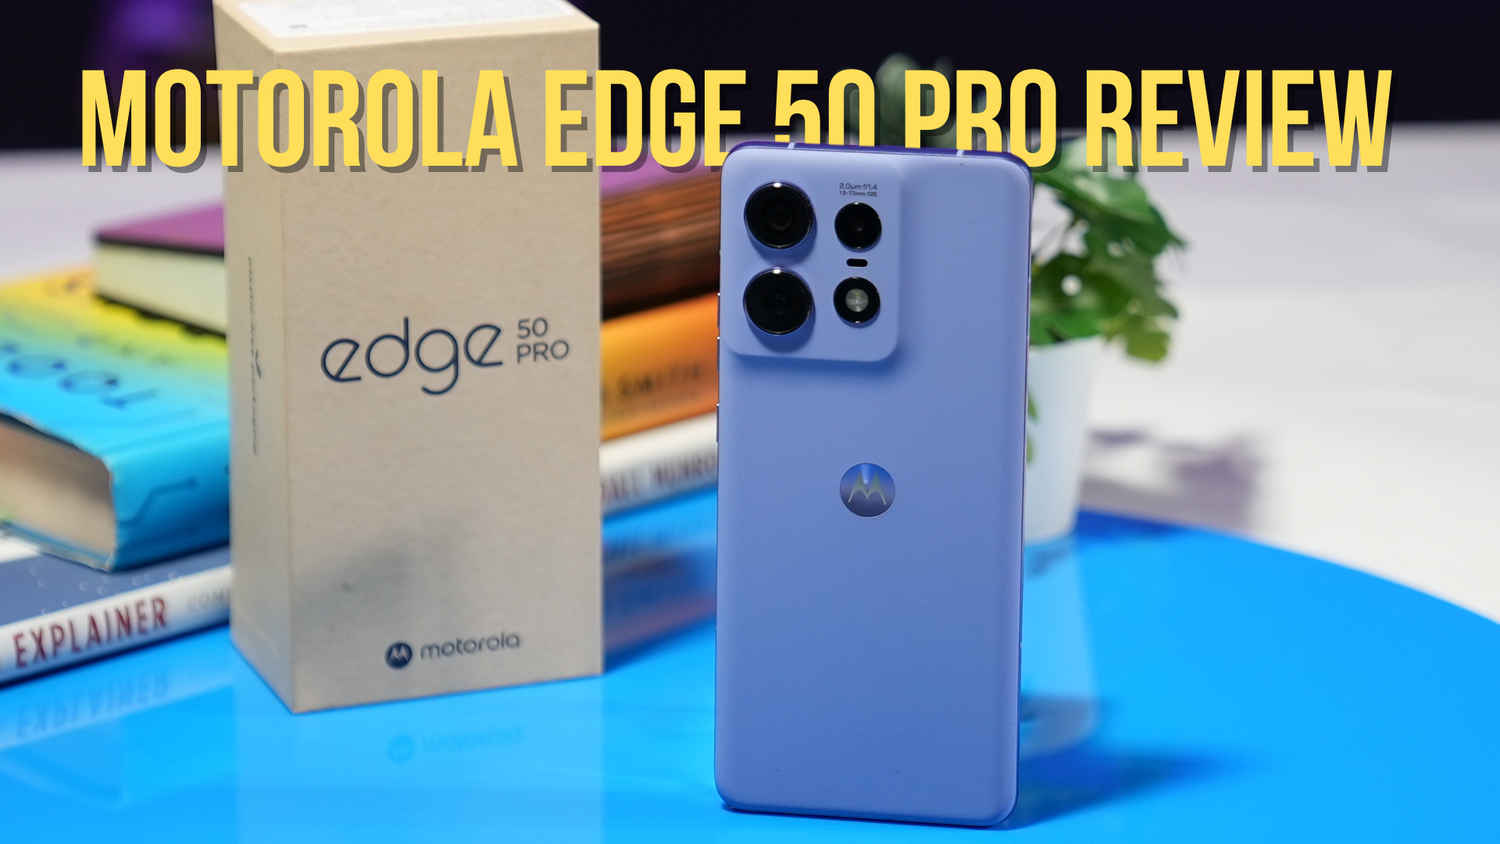 Motorola Edge 50 Pro Review: Nearly perfect, but camera misses the mark